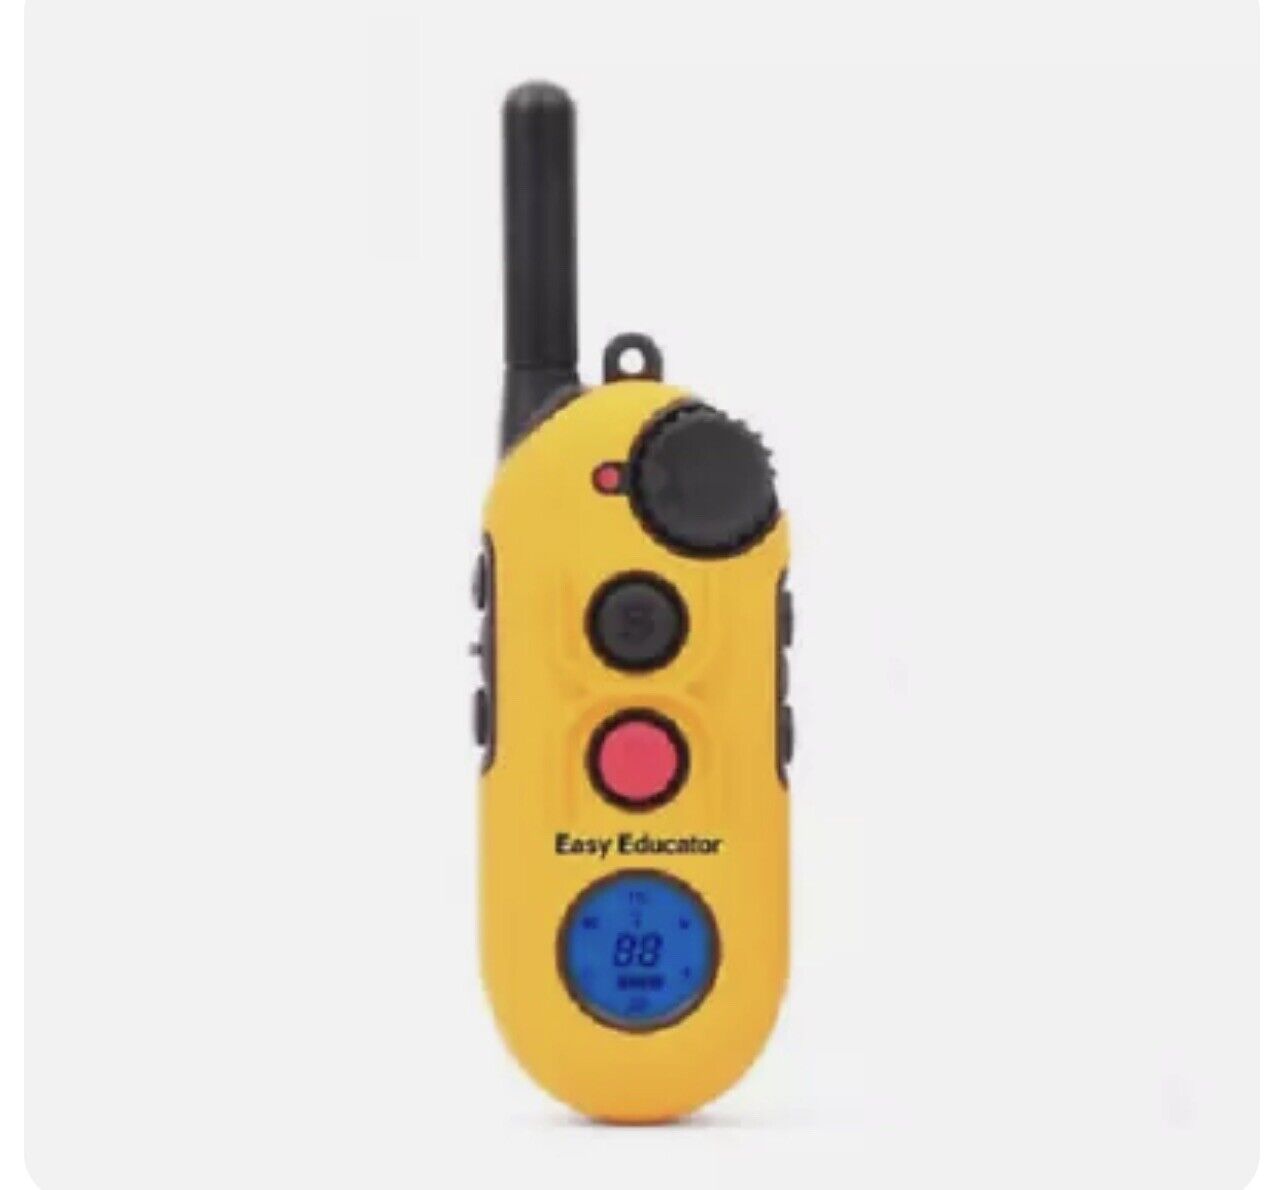 E-Collar Technologies Educator OFFicial site EZ-900 Remote ½ Super beauty product restock quality top with Replacement